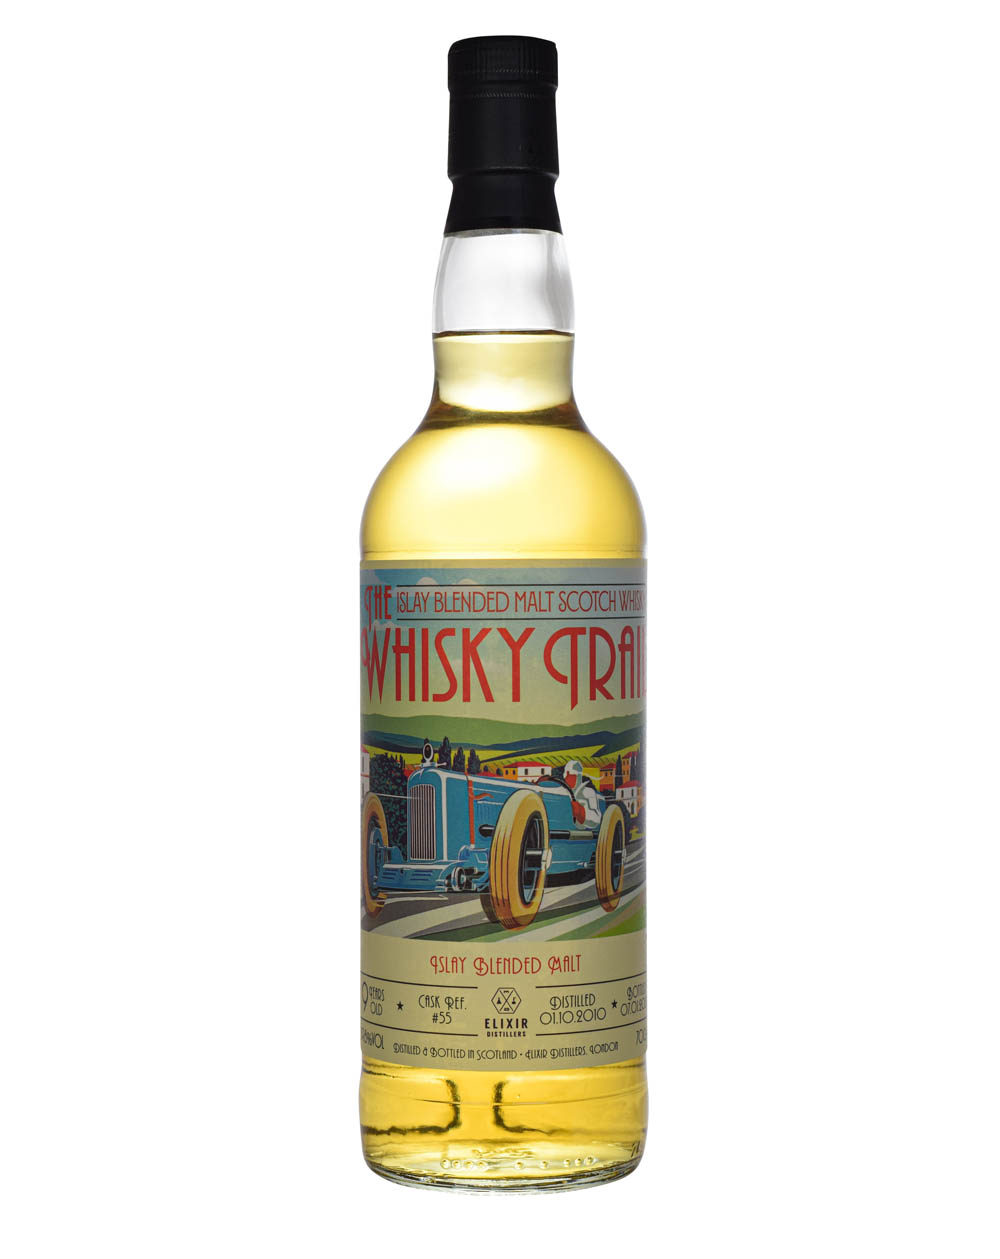 Whisky Trail Islay Blended Malt 9 Years Old